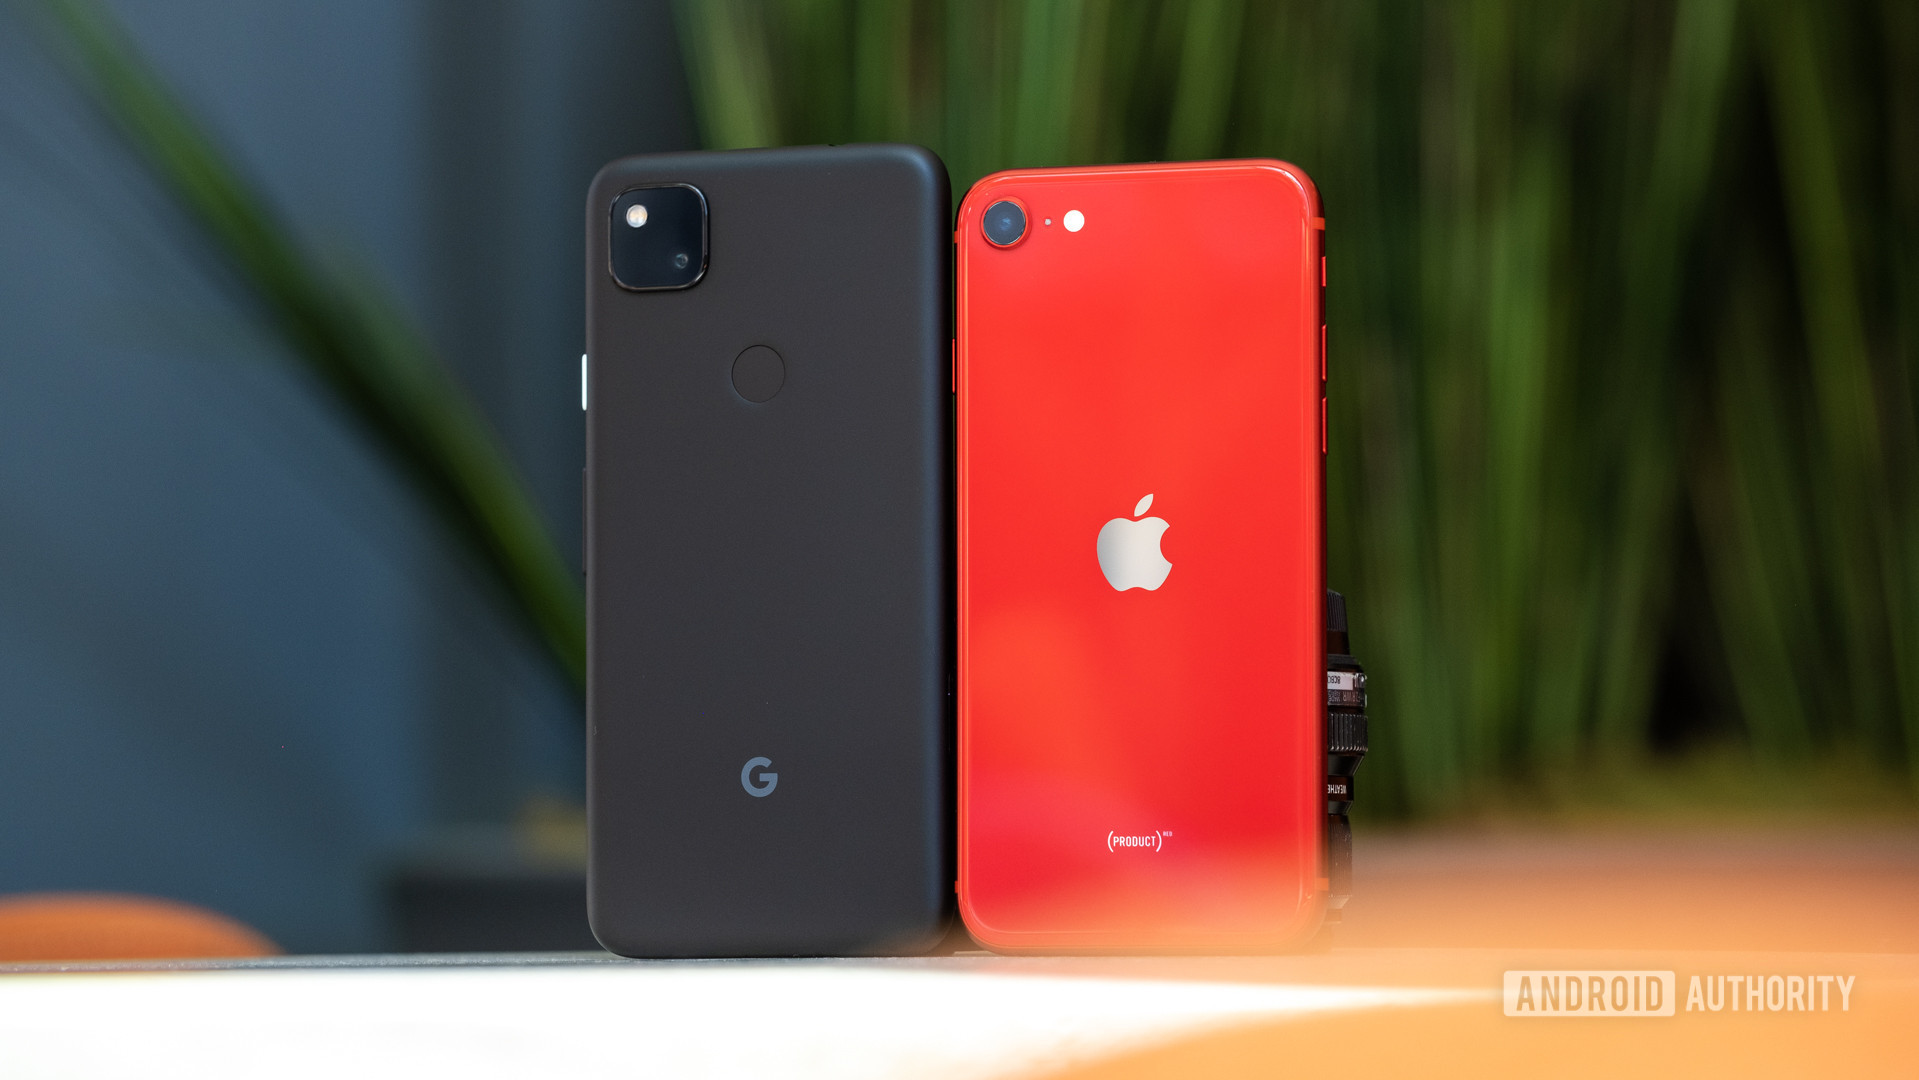 The Google Pixel 4a next to a red iPhone SE 2020 showing the back of both phones.